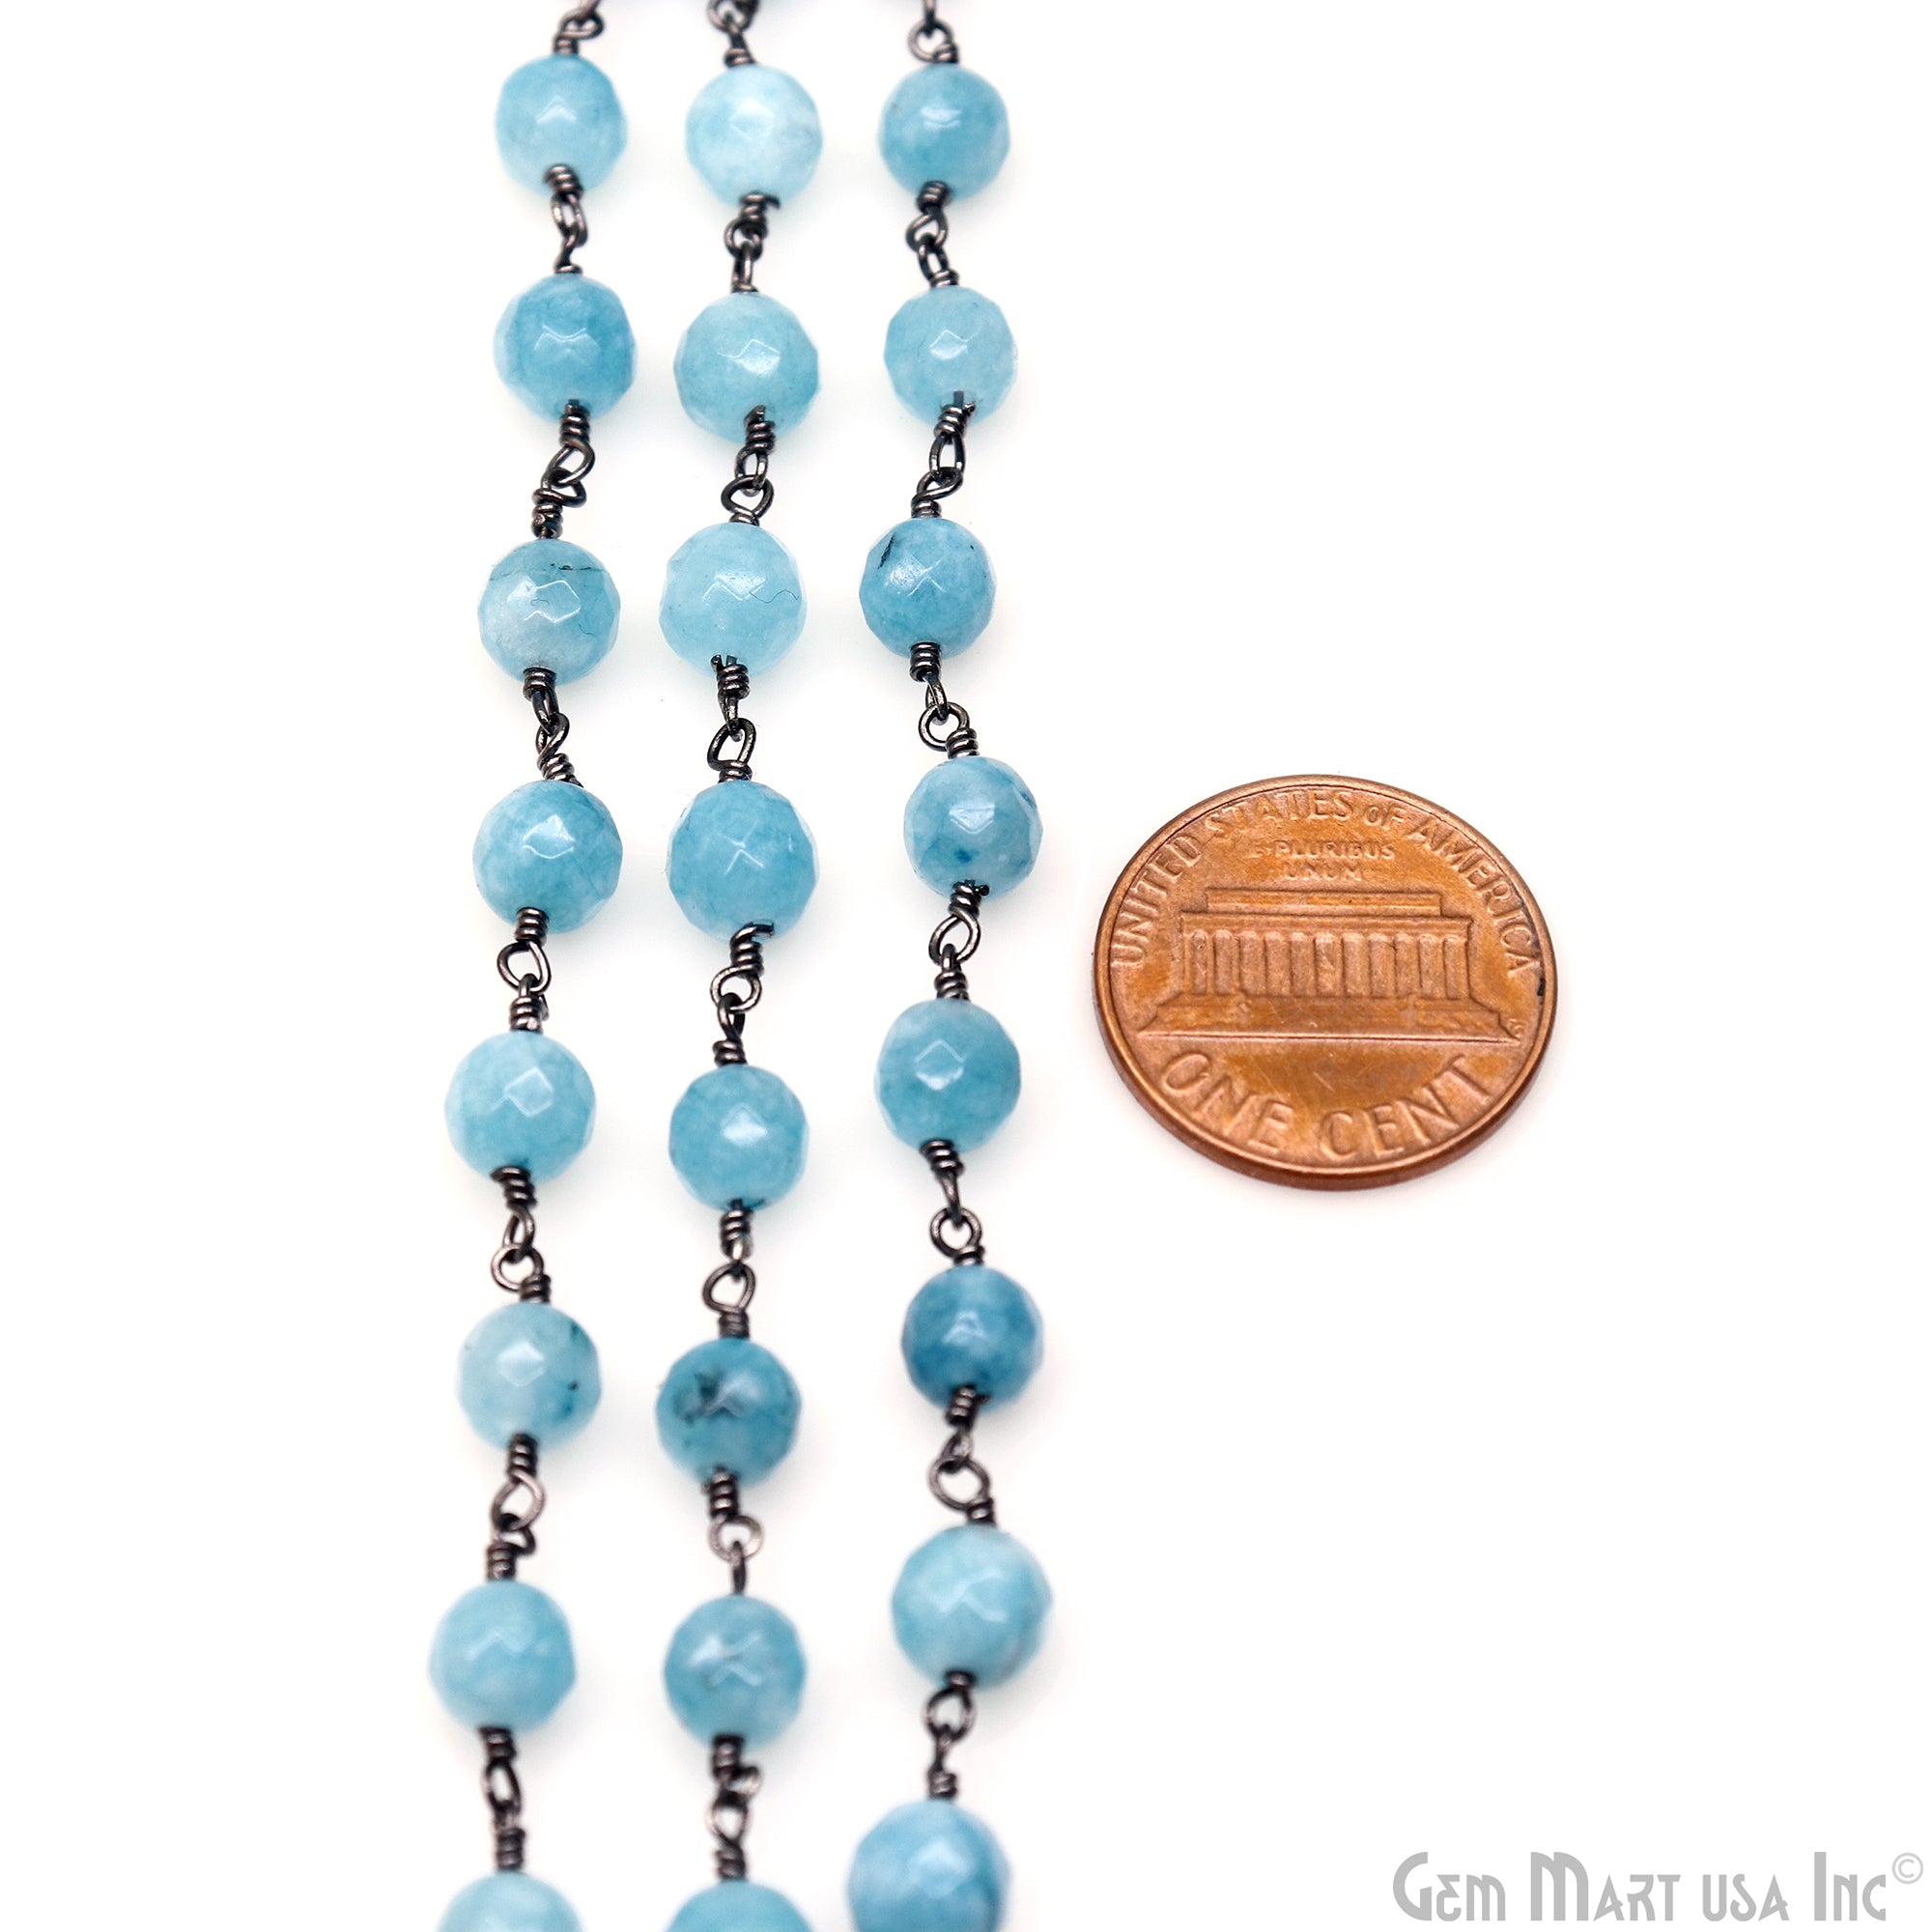 Shaded Blue Jade Faceted Beads 6mm Oxidized Gemstone Rosary Chain